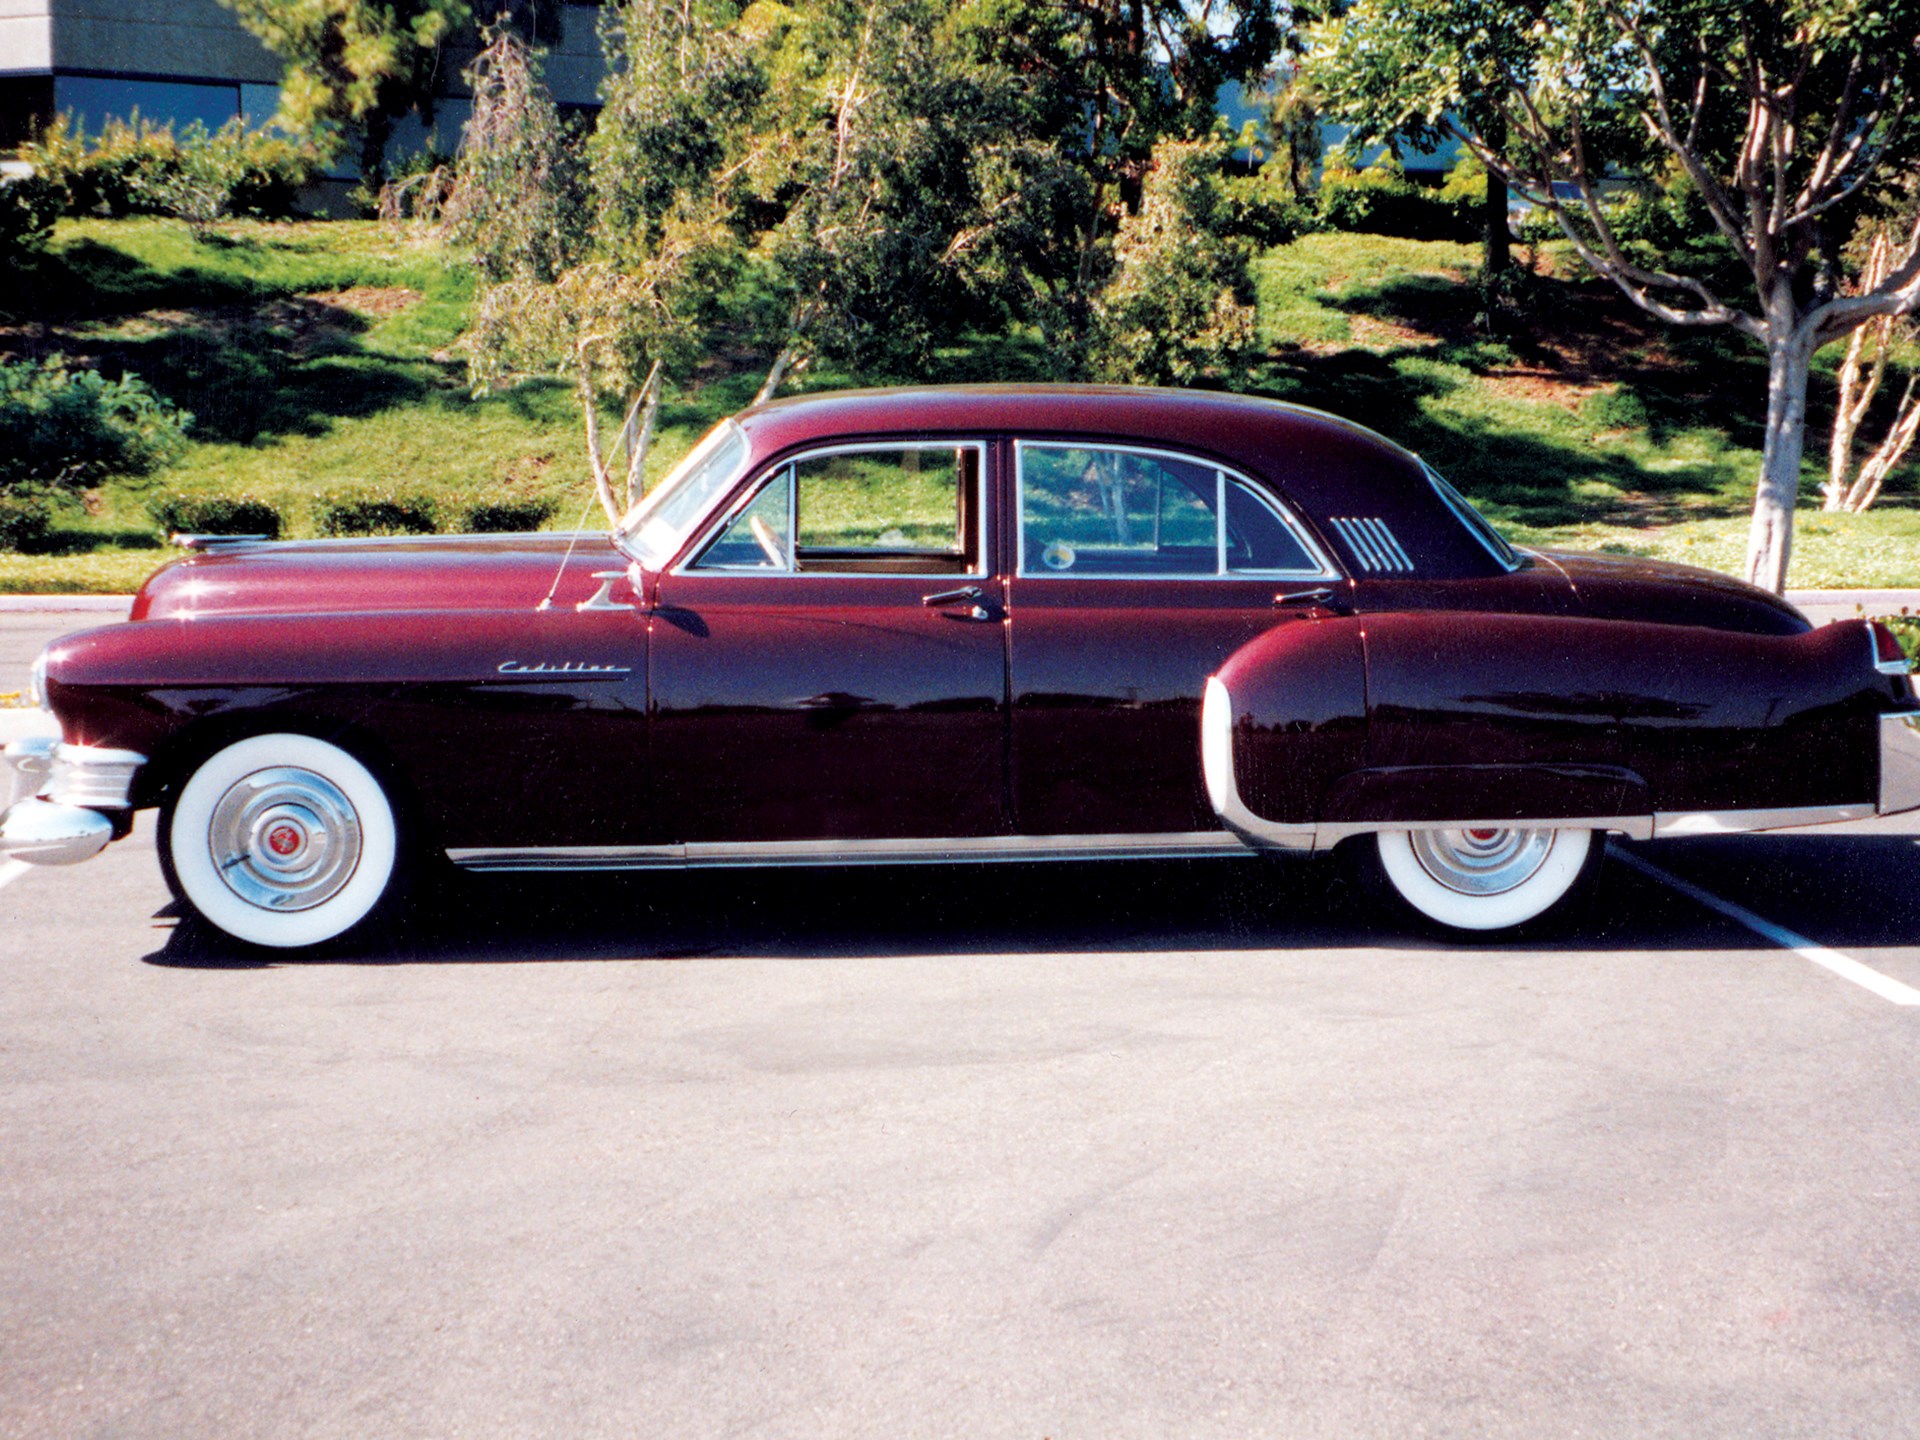 RM Sotheby's - 1949 Cadillac Sixty Special Fleetwood | Vintage Motor ...